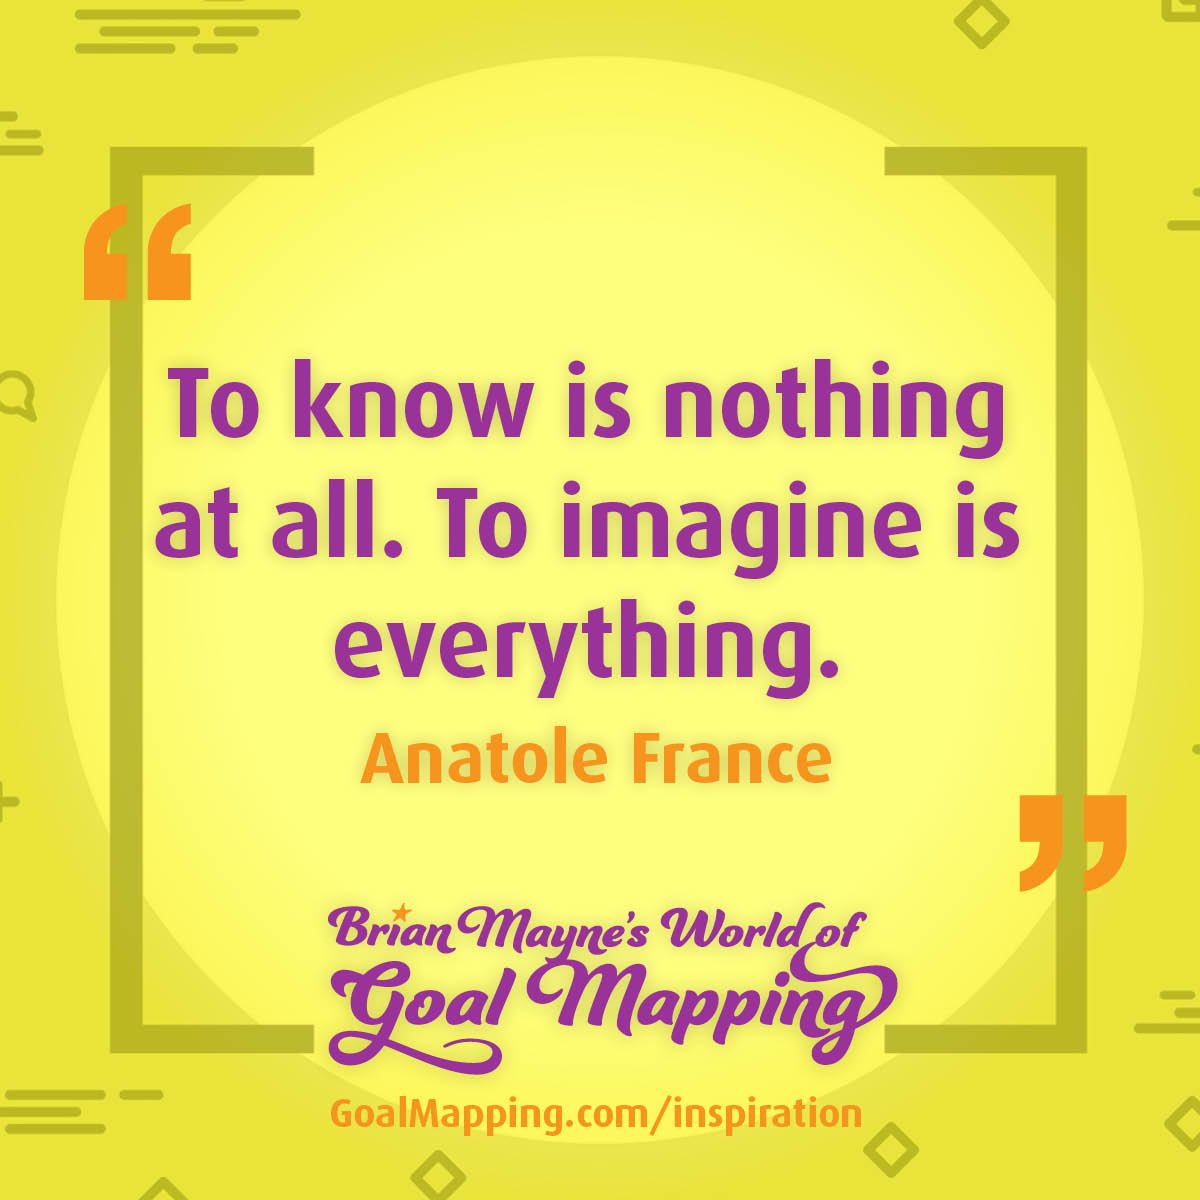 "To know is nothing at all. To imagine is everything." Anatole France